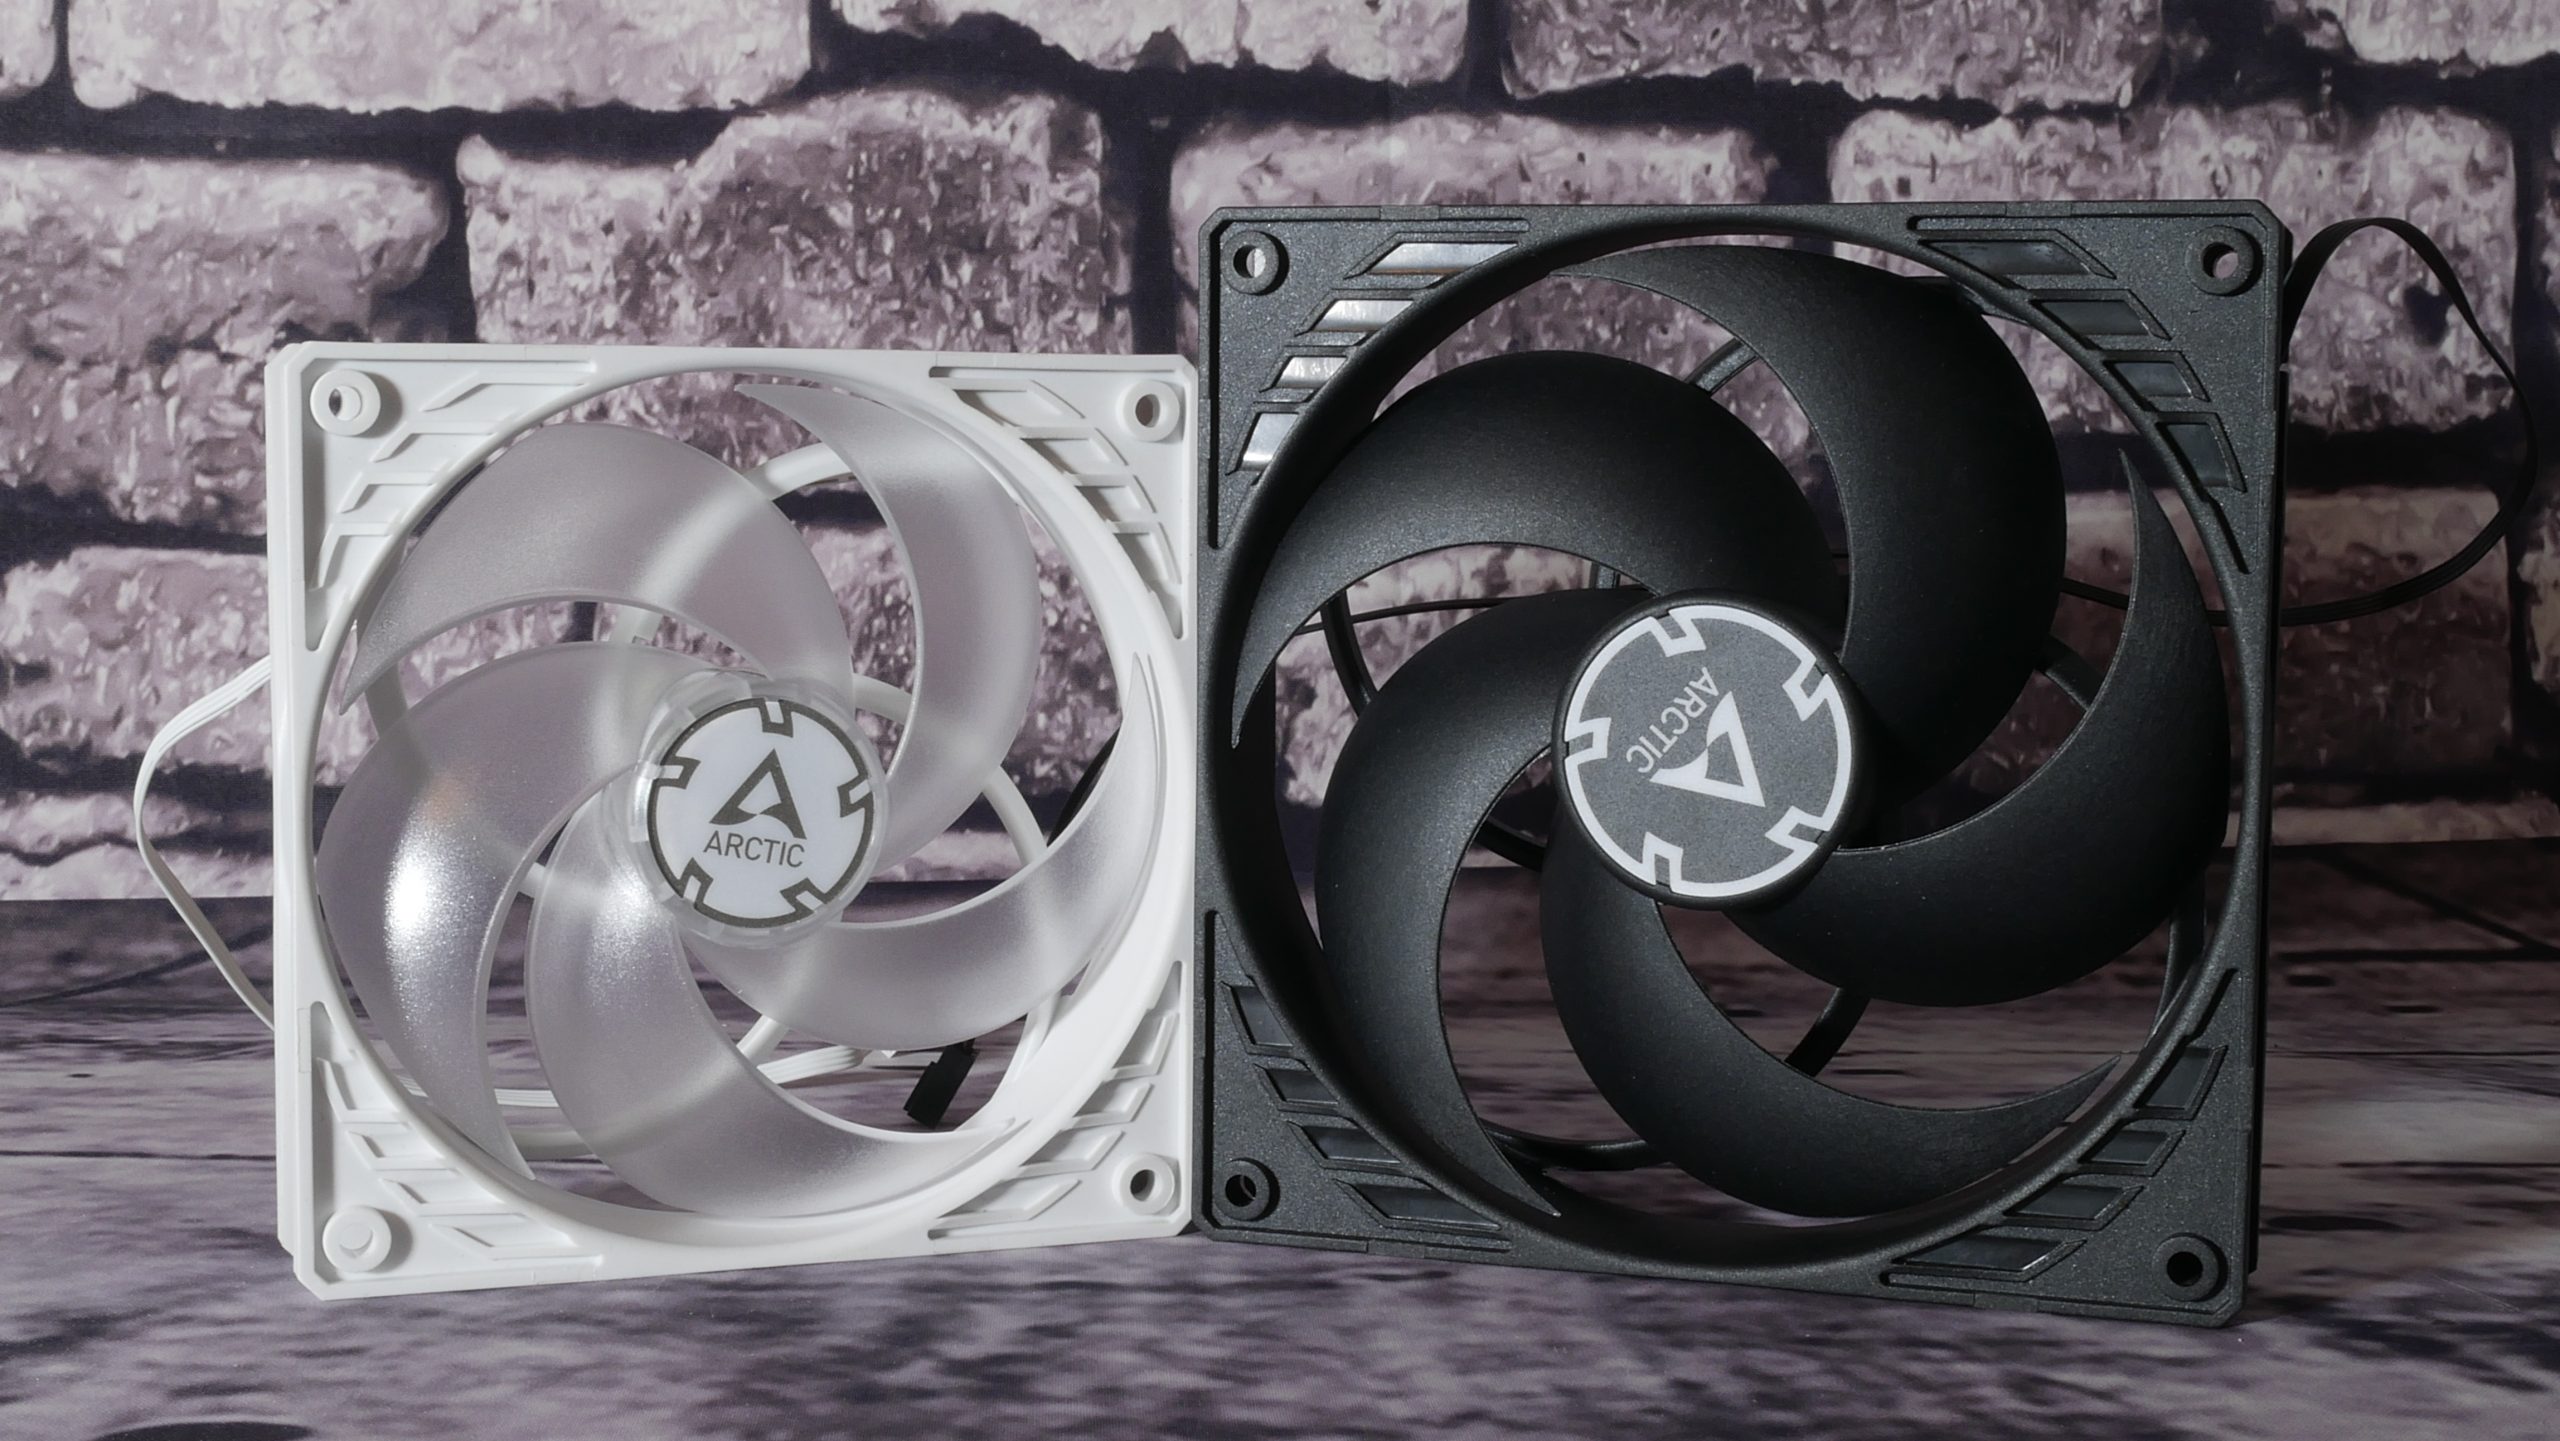 Unpleasant noises and humming with case fans: Arctic P12 versus P14 in the detailed test